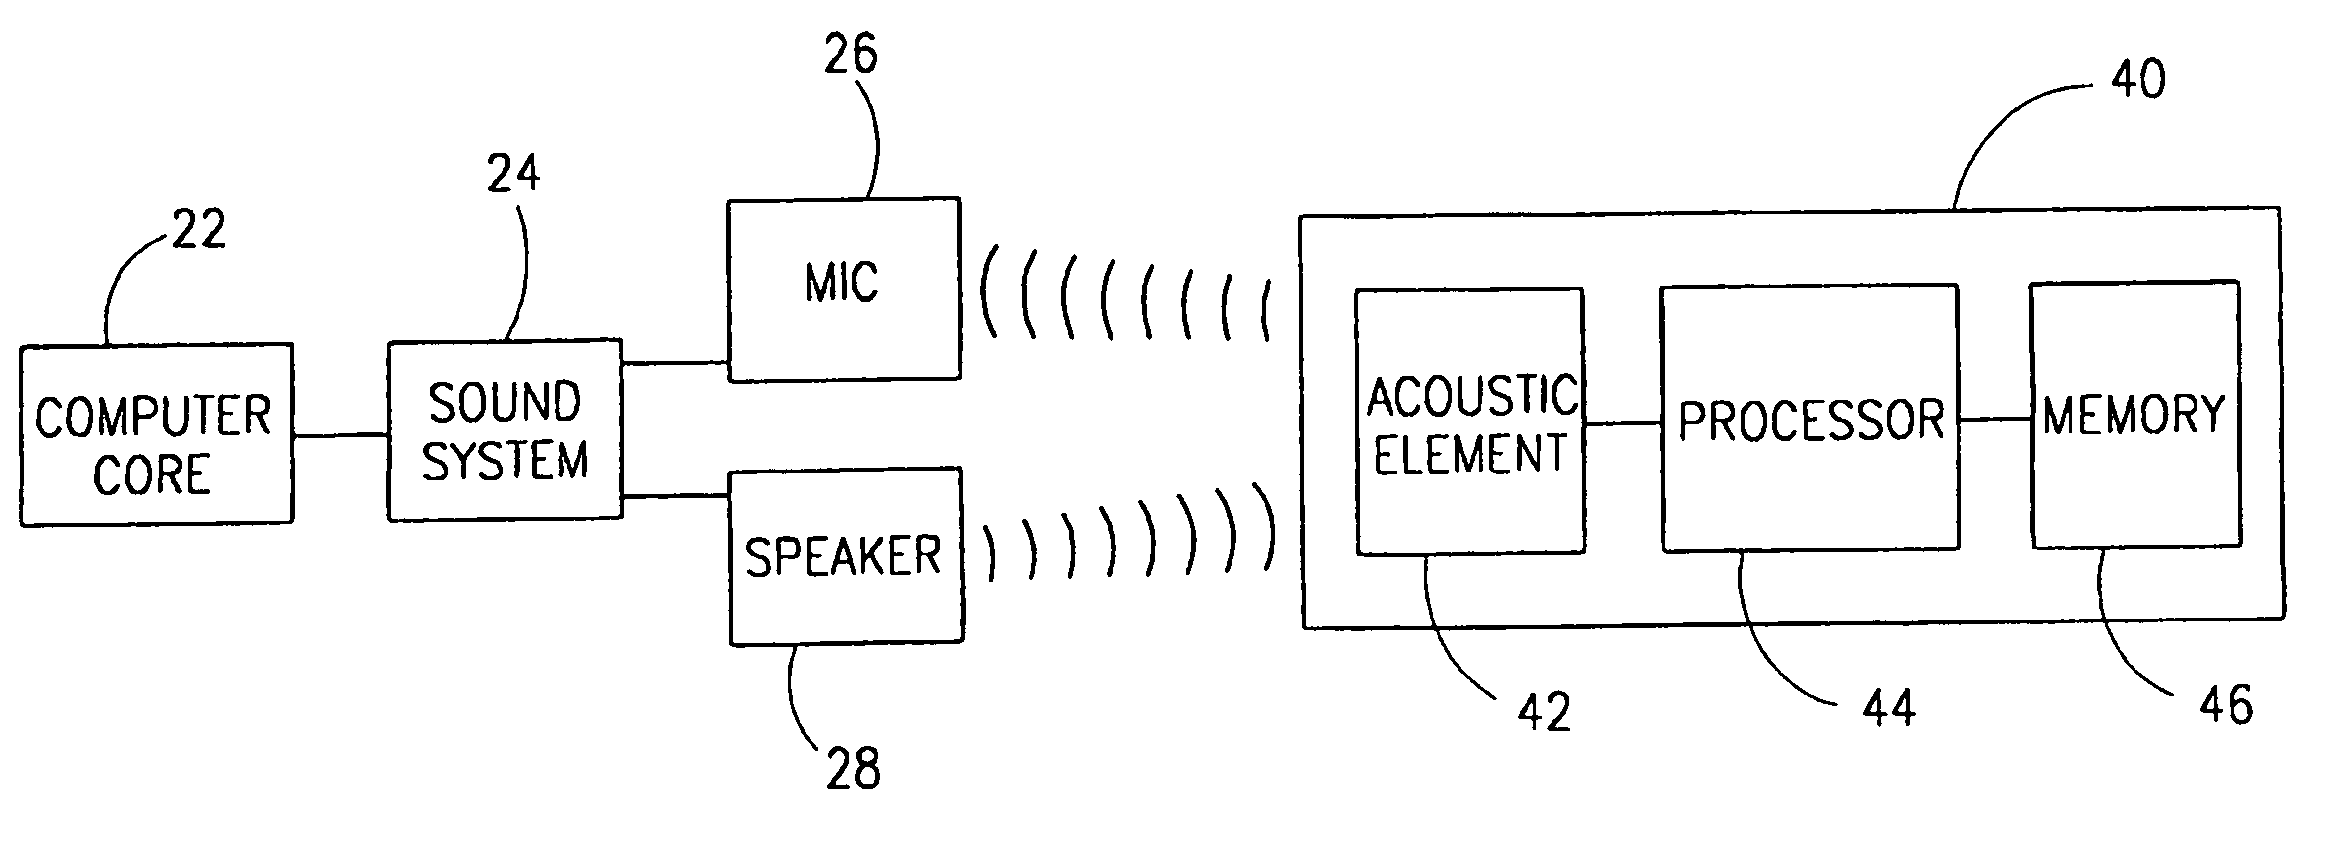 Computer communications using acoustic signals